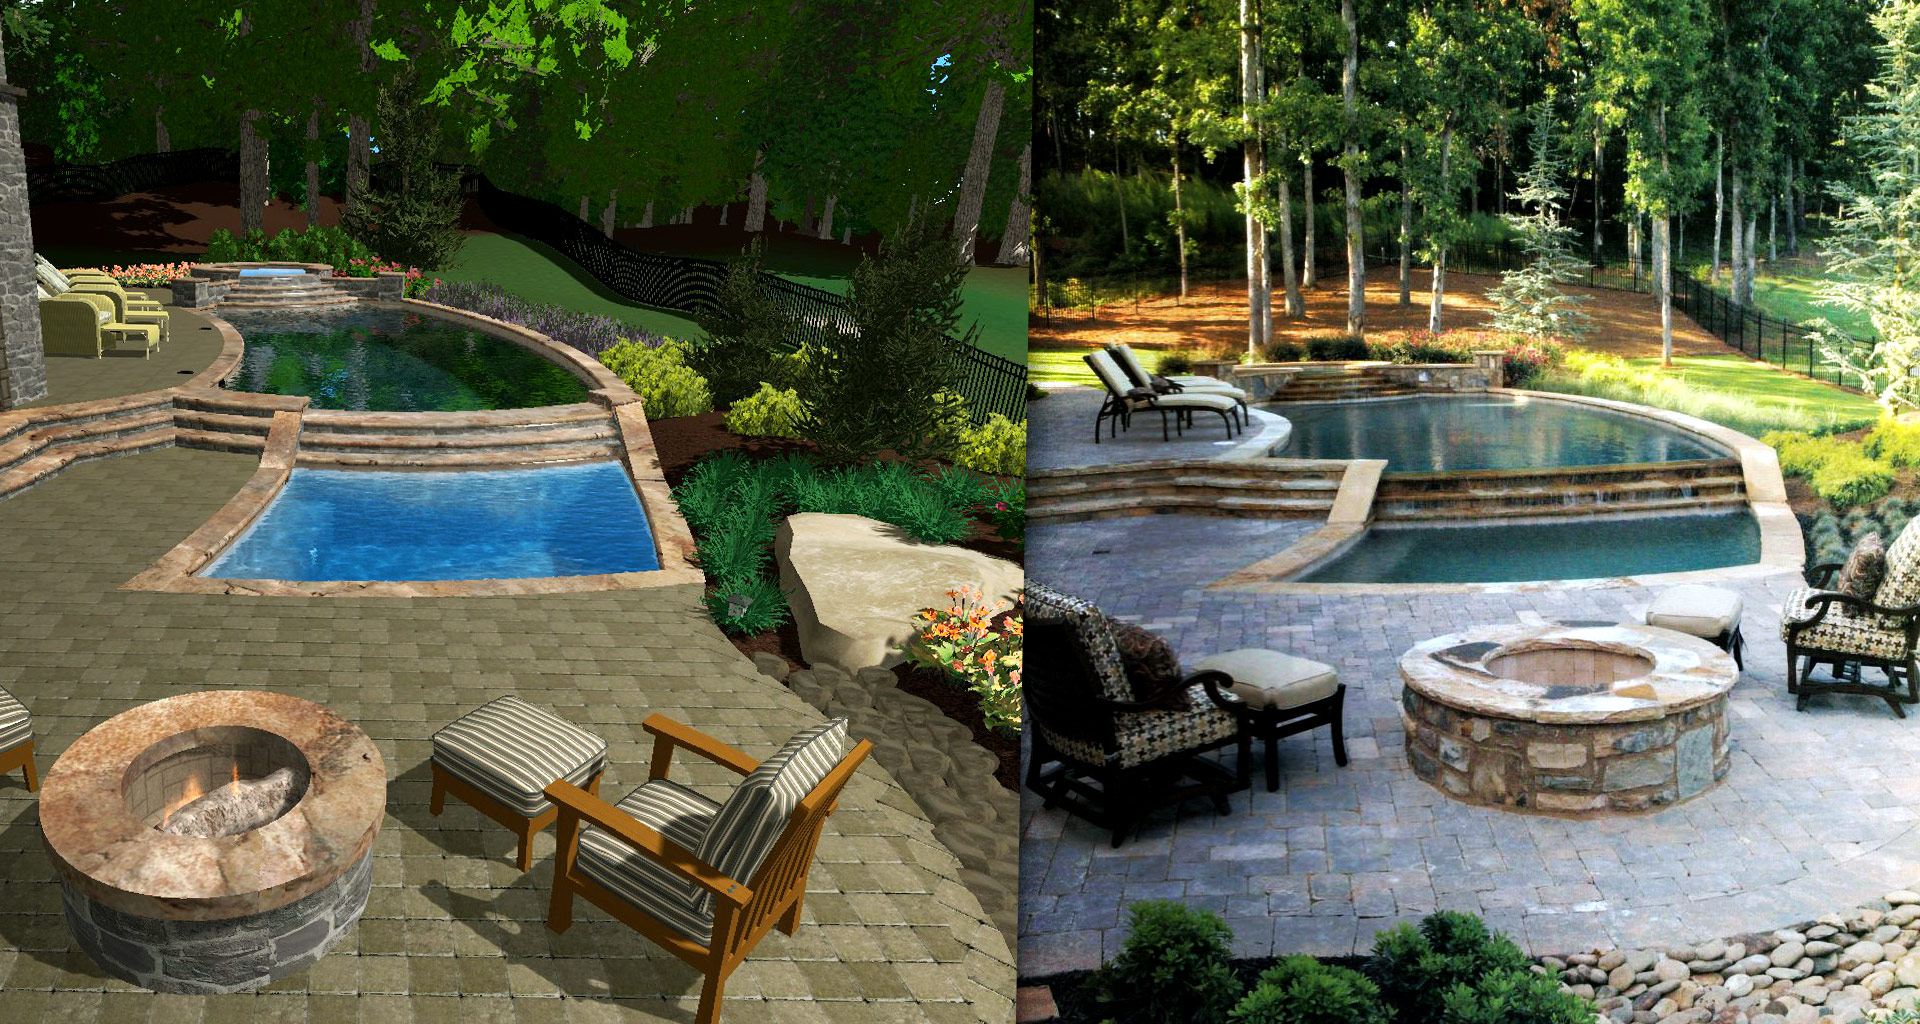 Focusing on Details - Pool Studio Rendering and Real Project Comparison